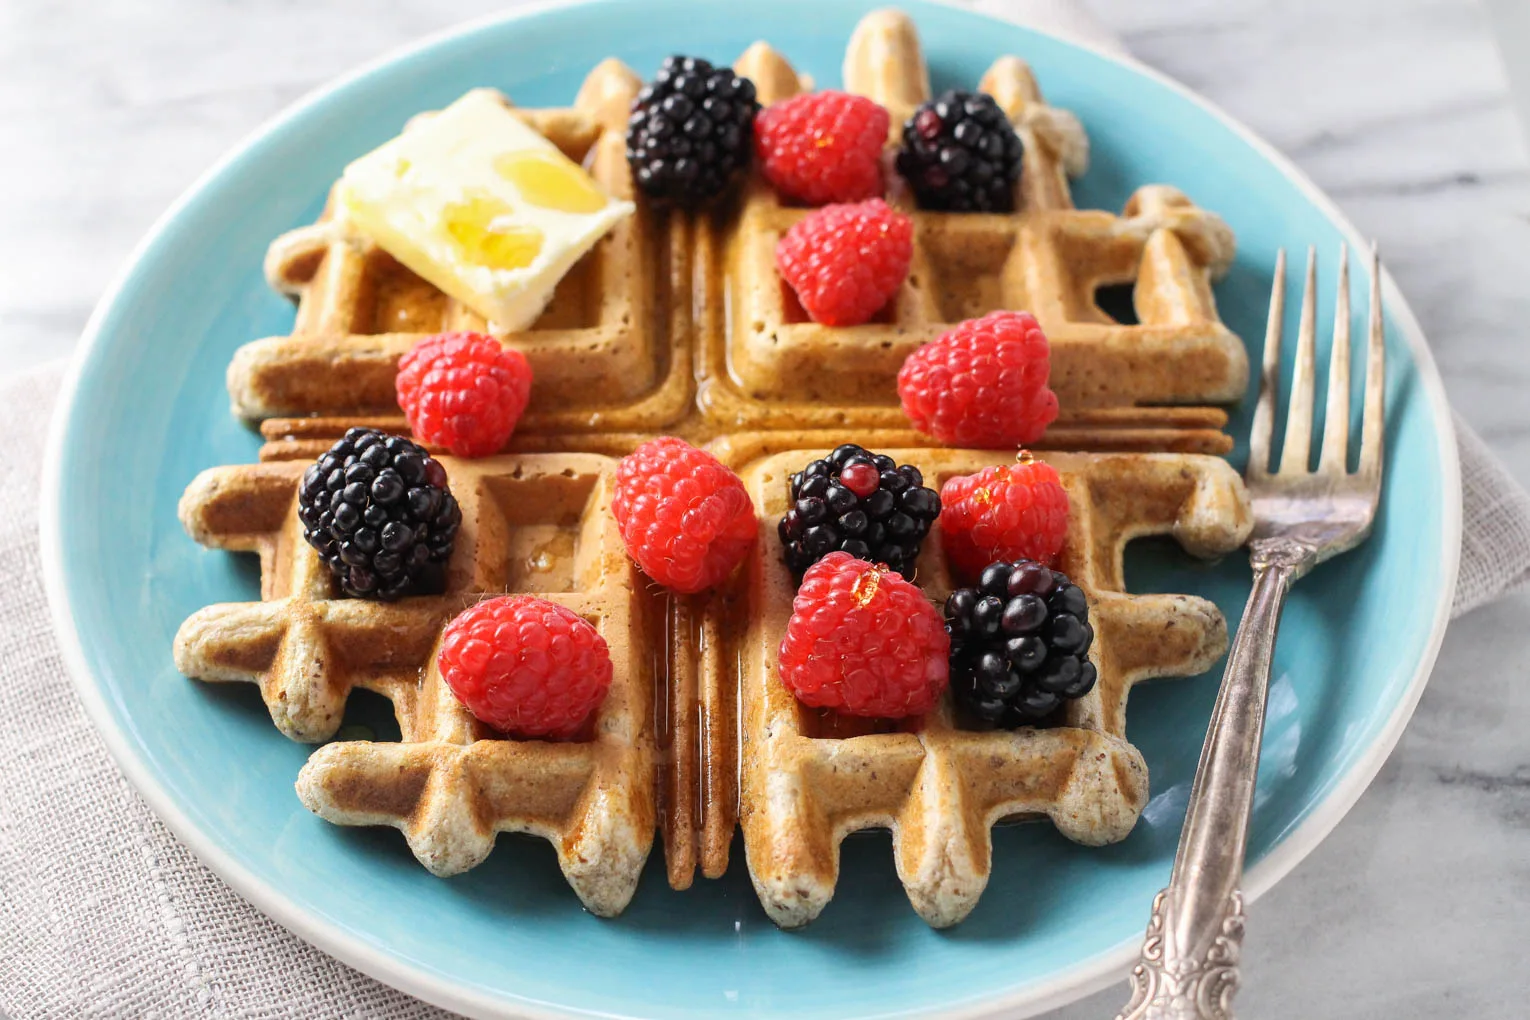 Whole wheat waffle on a blue plate, The waffles is garnished with berries, butter, and maple syrup. A silver fork is to the right of the waffle.